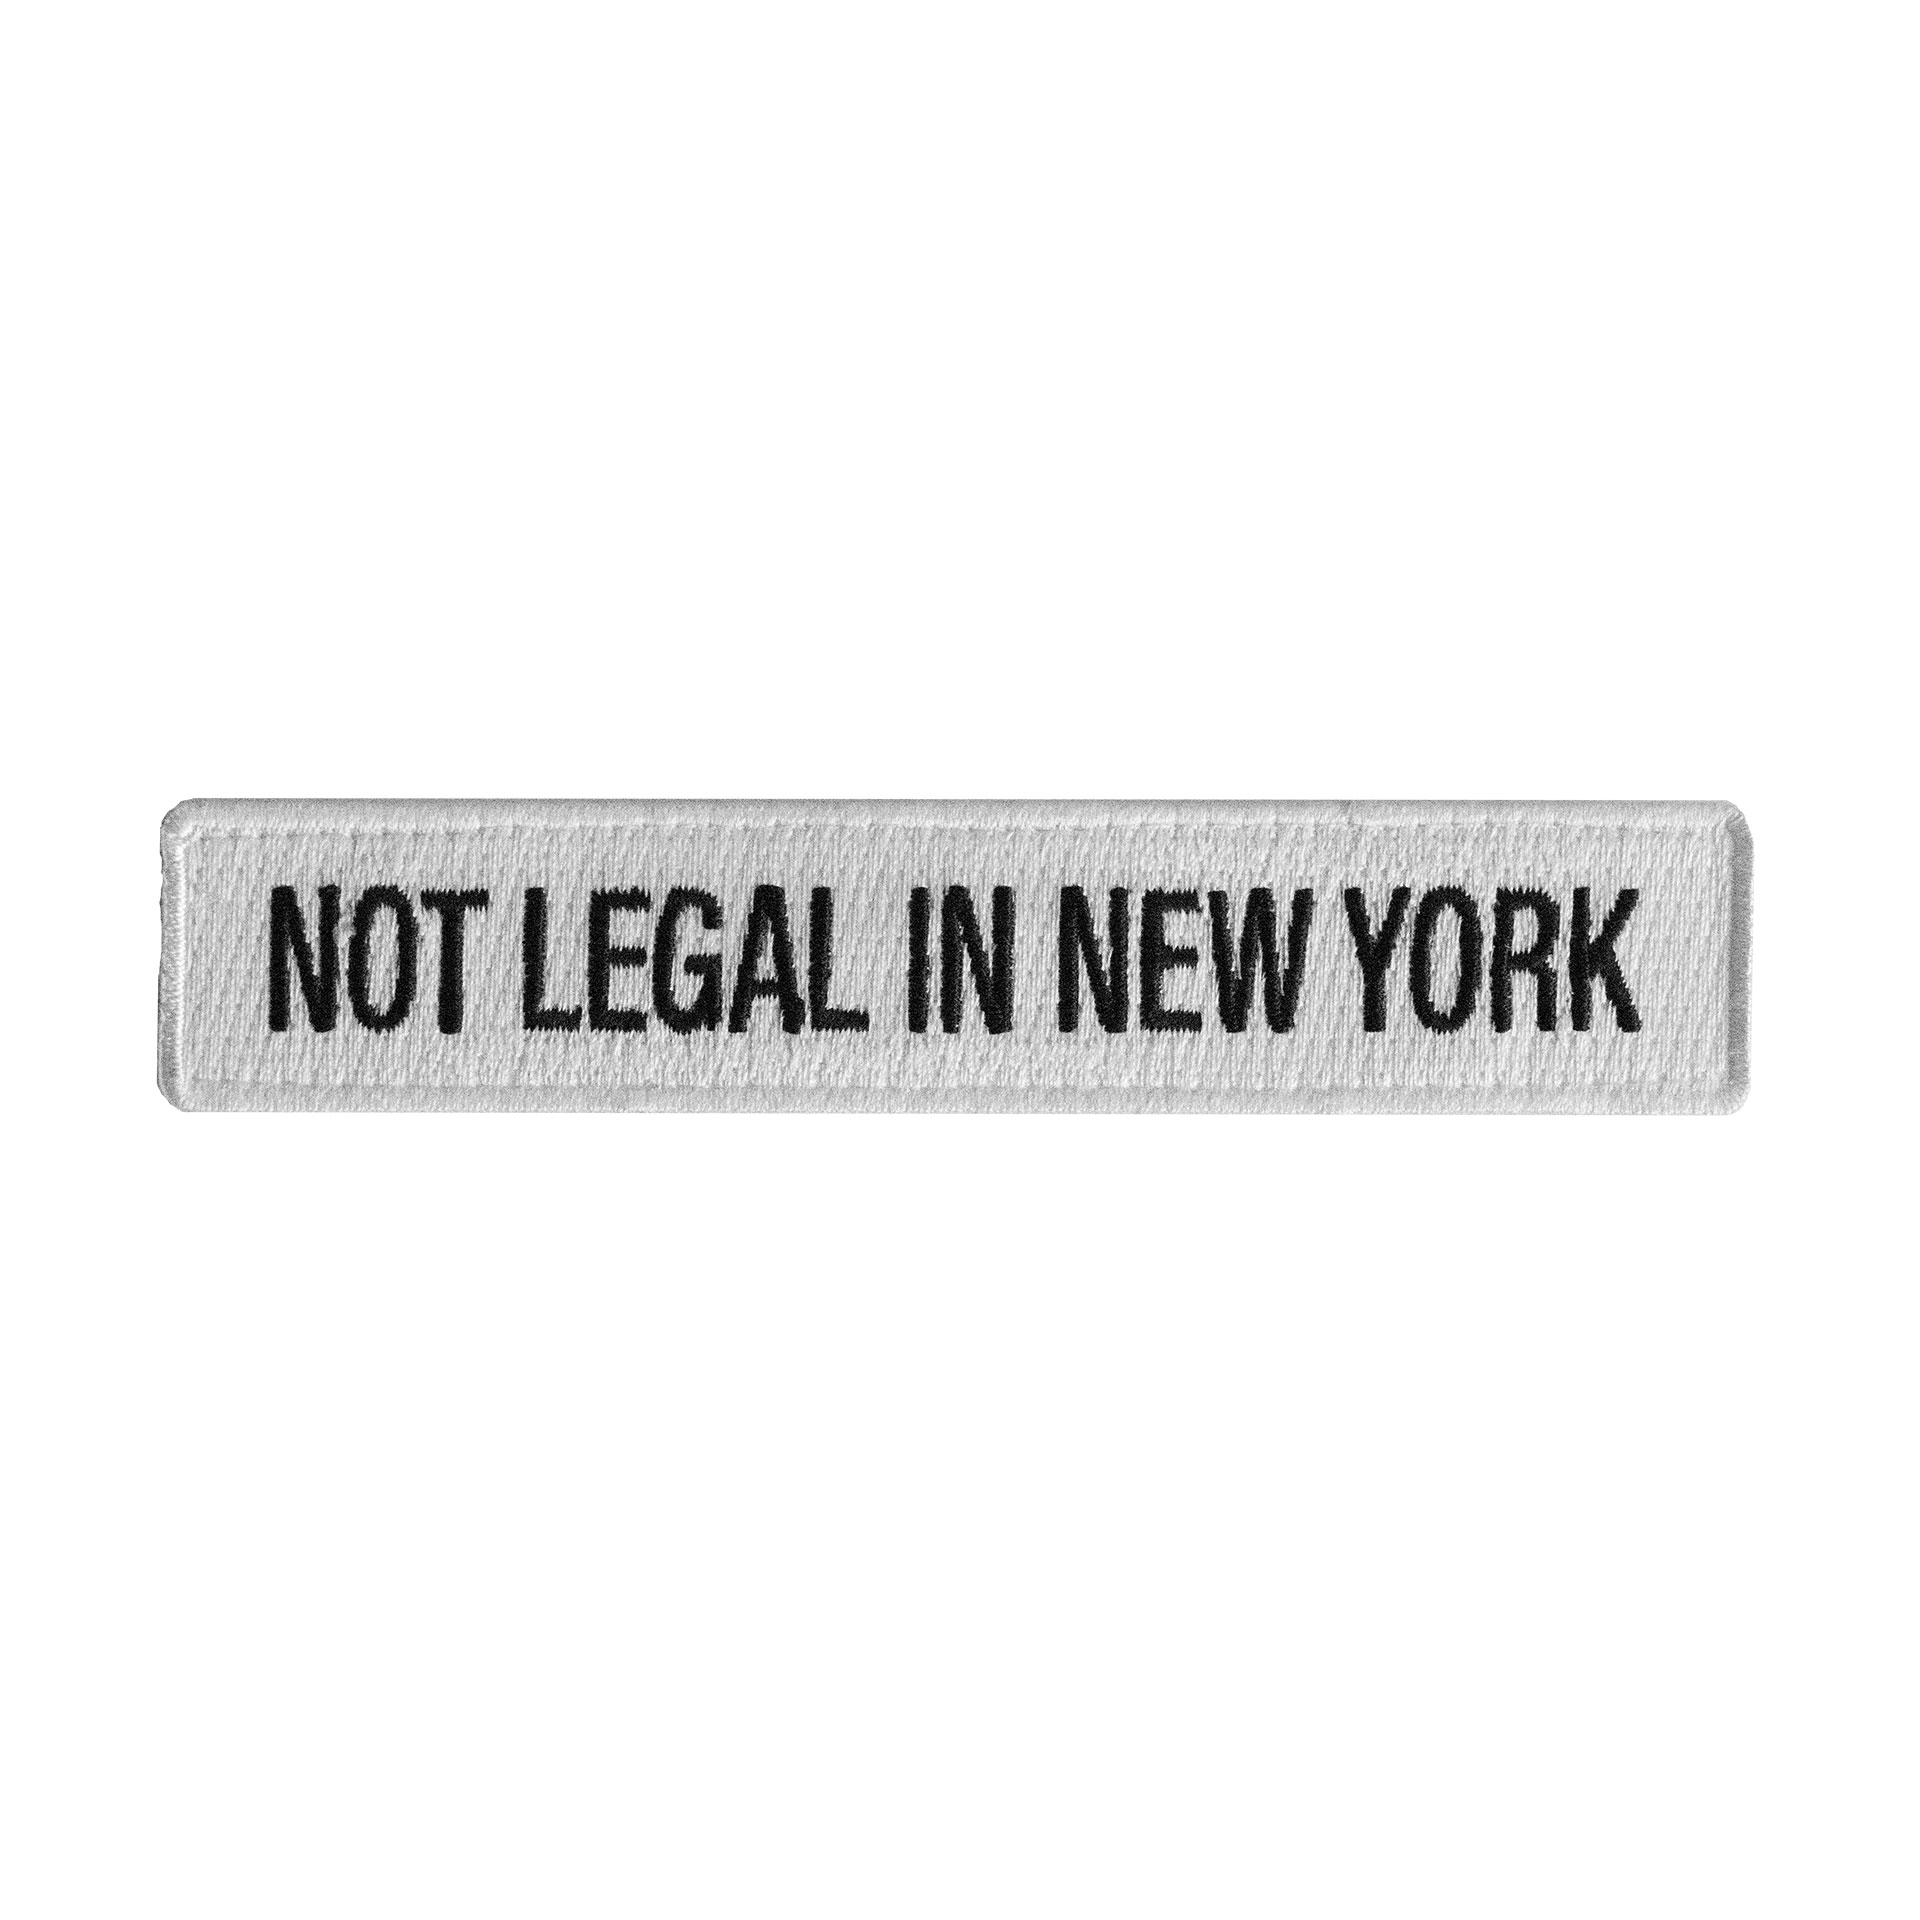 Not Legal In New York Morale Patch